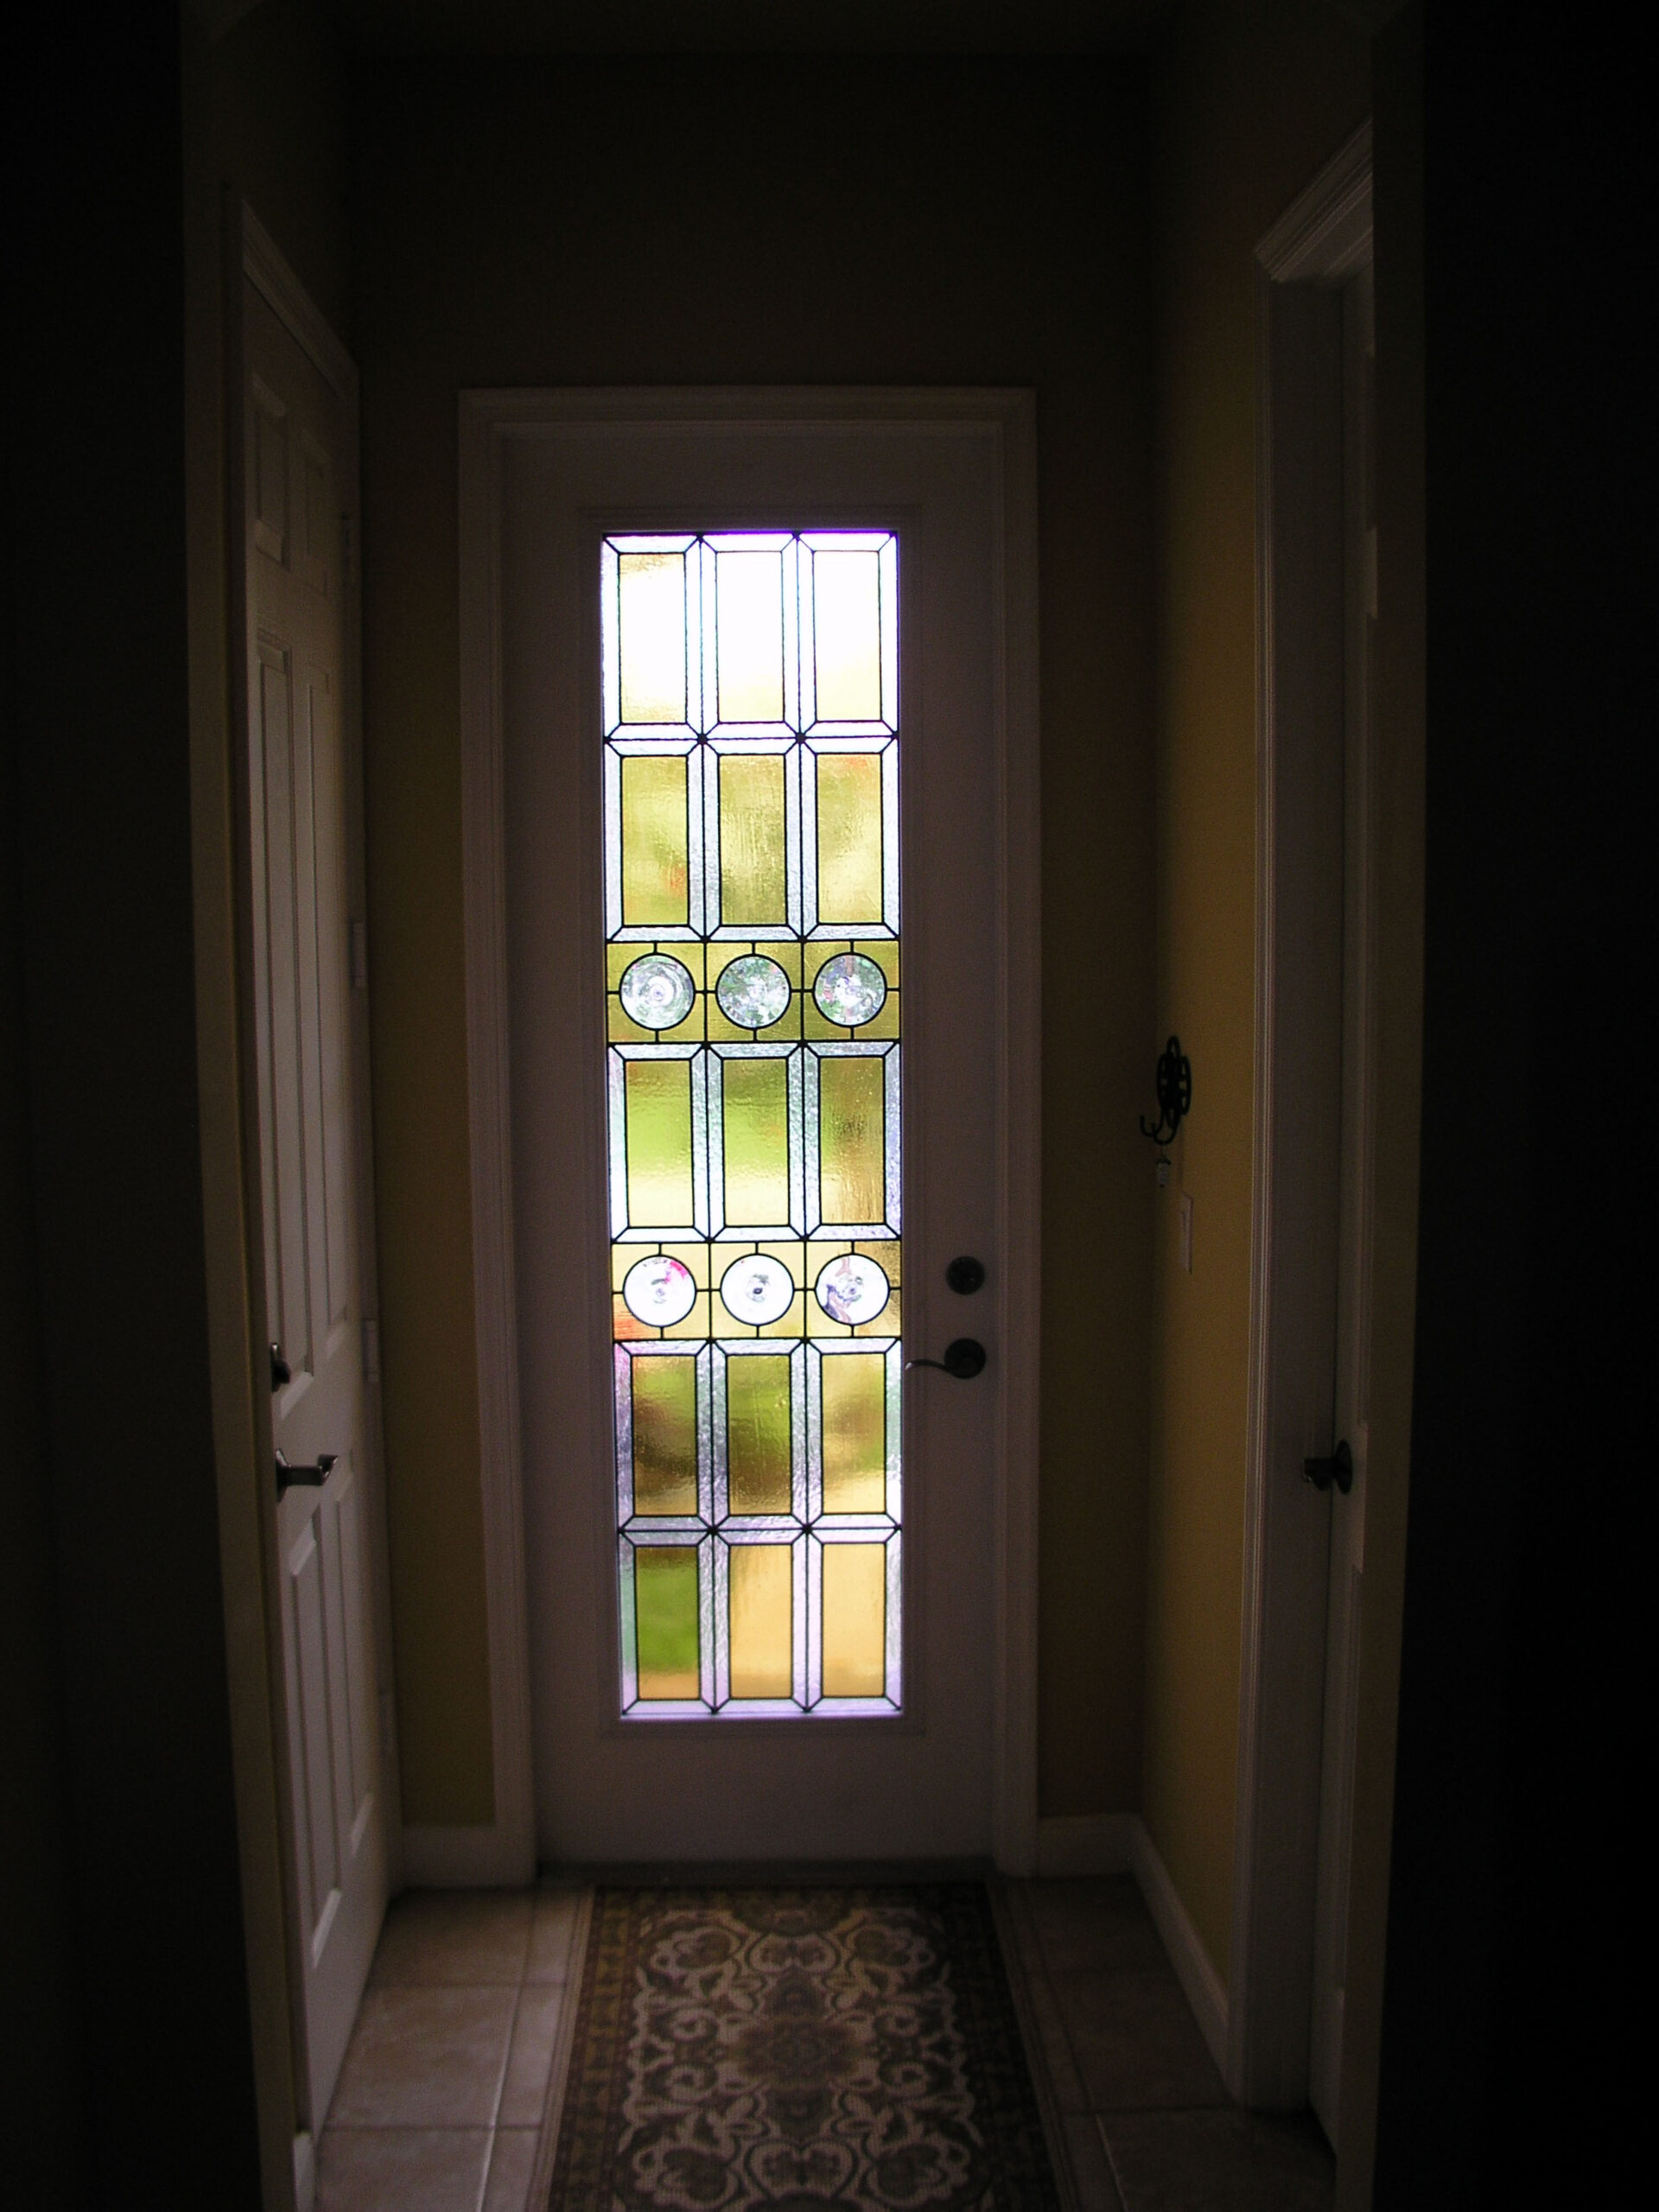 Small doorway with rondels, yellow, and cleat textured glass in a Traditional style.